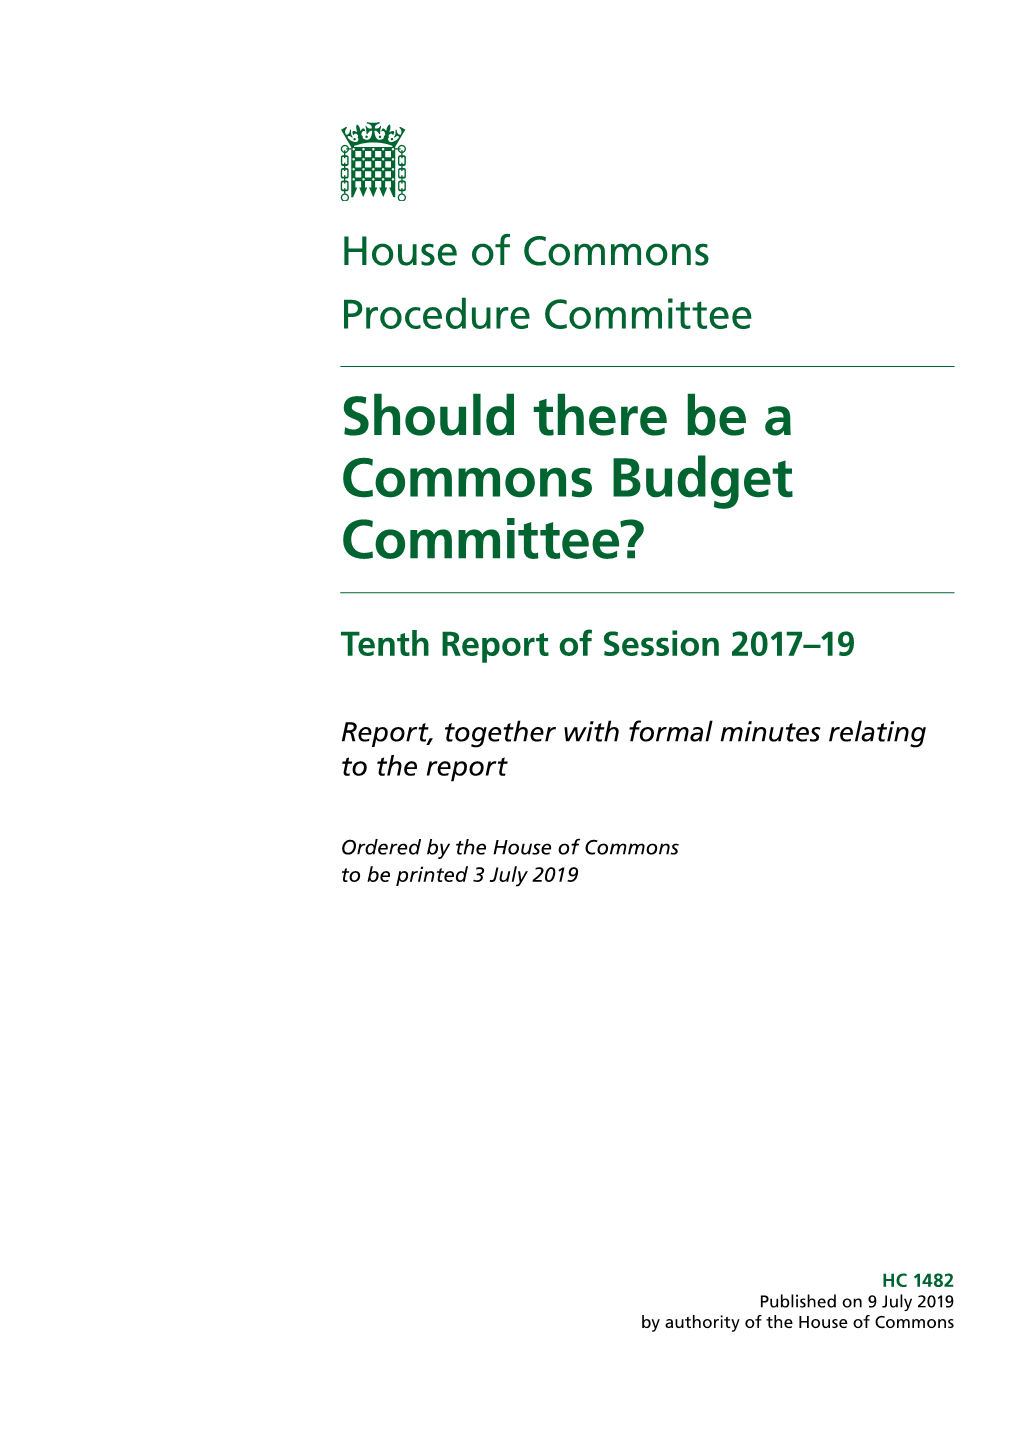 Should There Be a Commons Budget Committee?